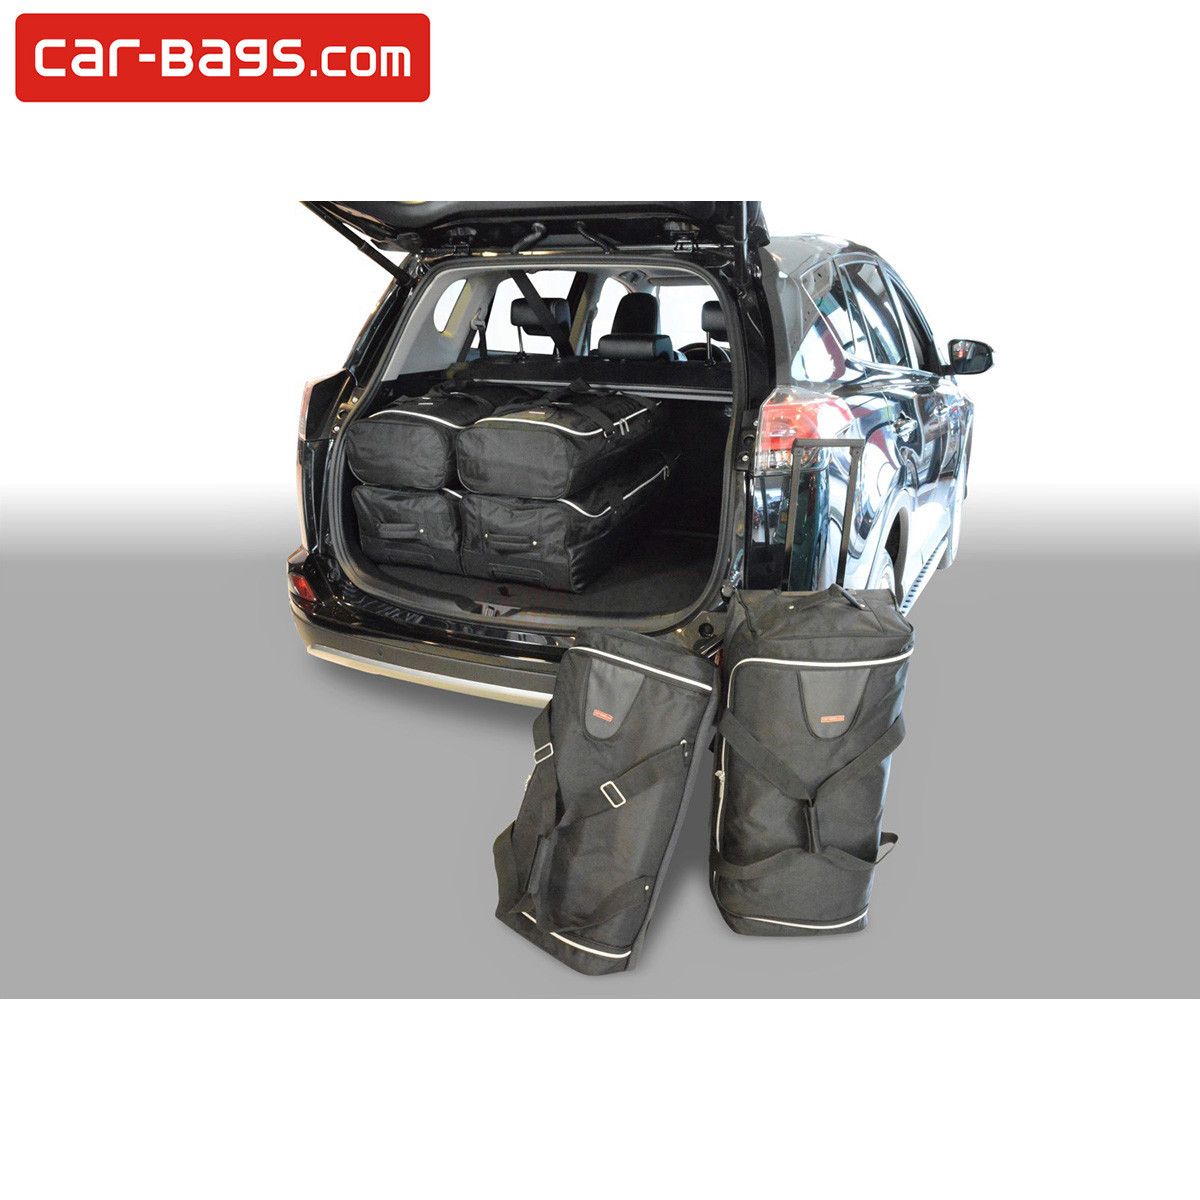 Travel bags fits Toyota RAV4 IV Hybride (XA40) tailor made (6 bags), Time  and space saving for € 379, Perfect fit Car Bags